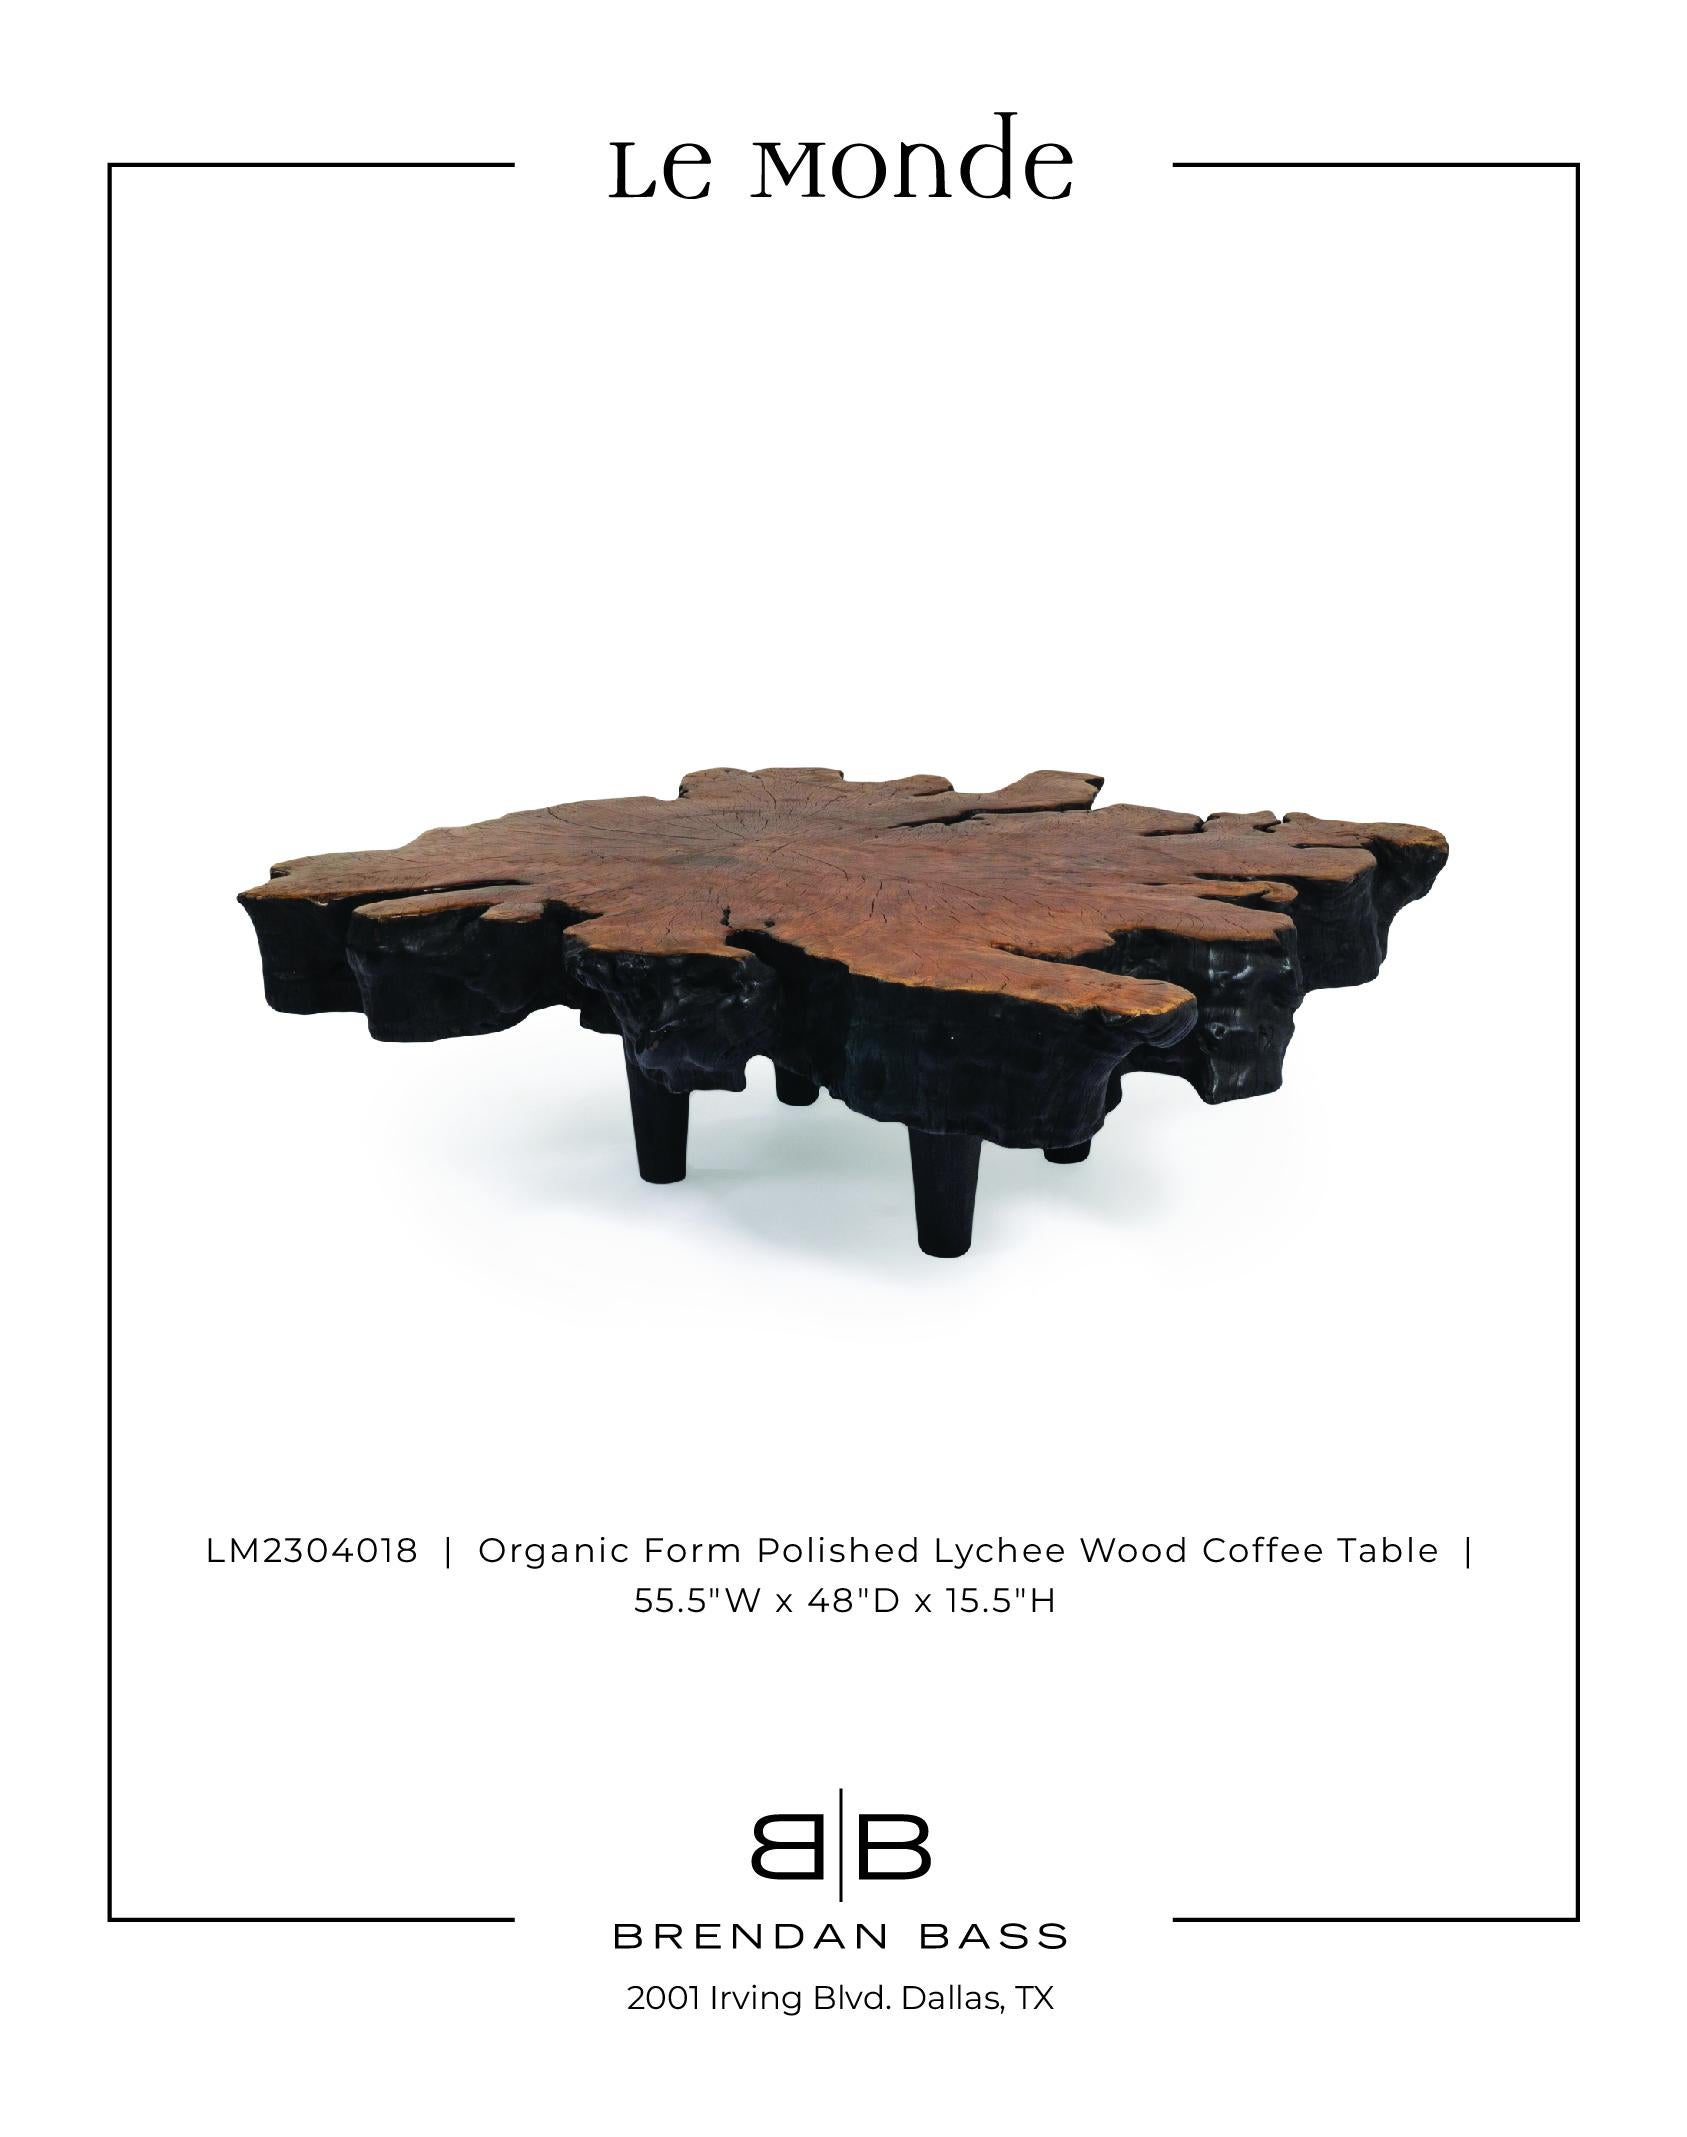 20th Century Organic From Polished Lychee Wood Coffee Table